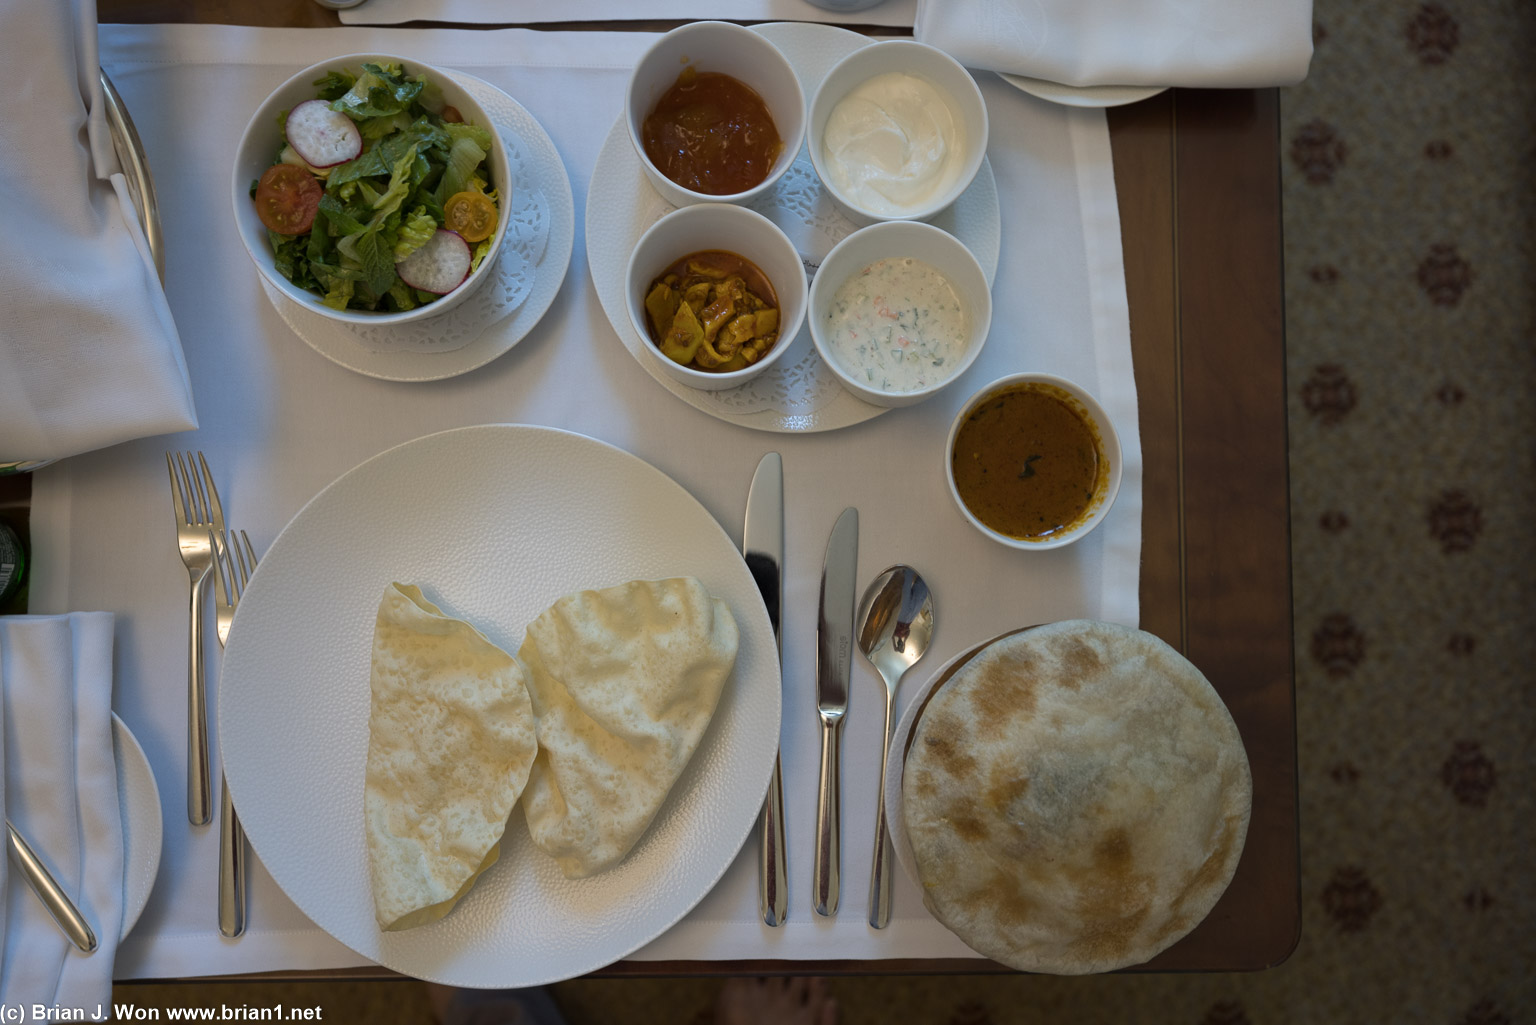 Room service was the only option for lunch due to Ramadan.